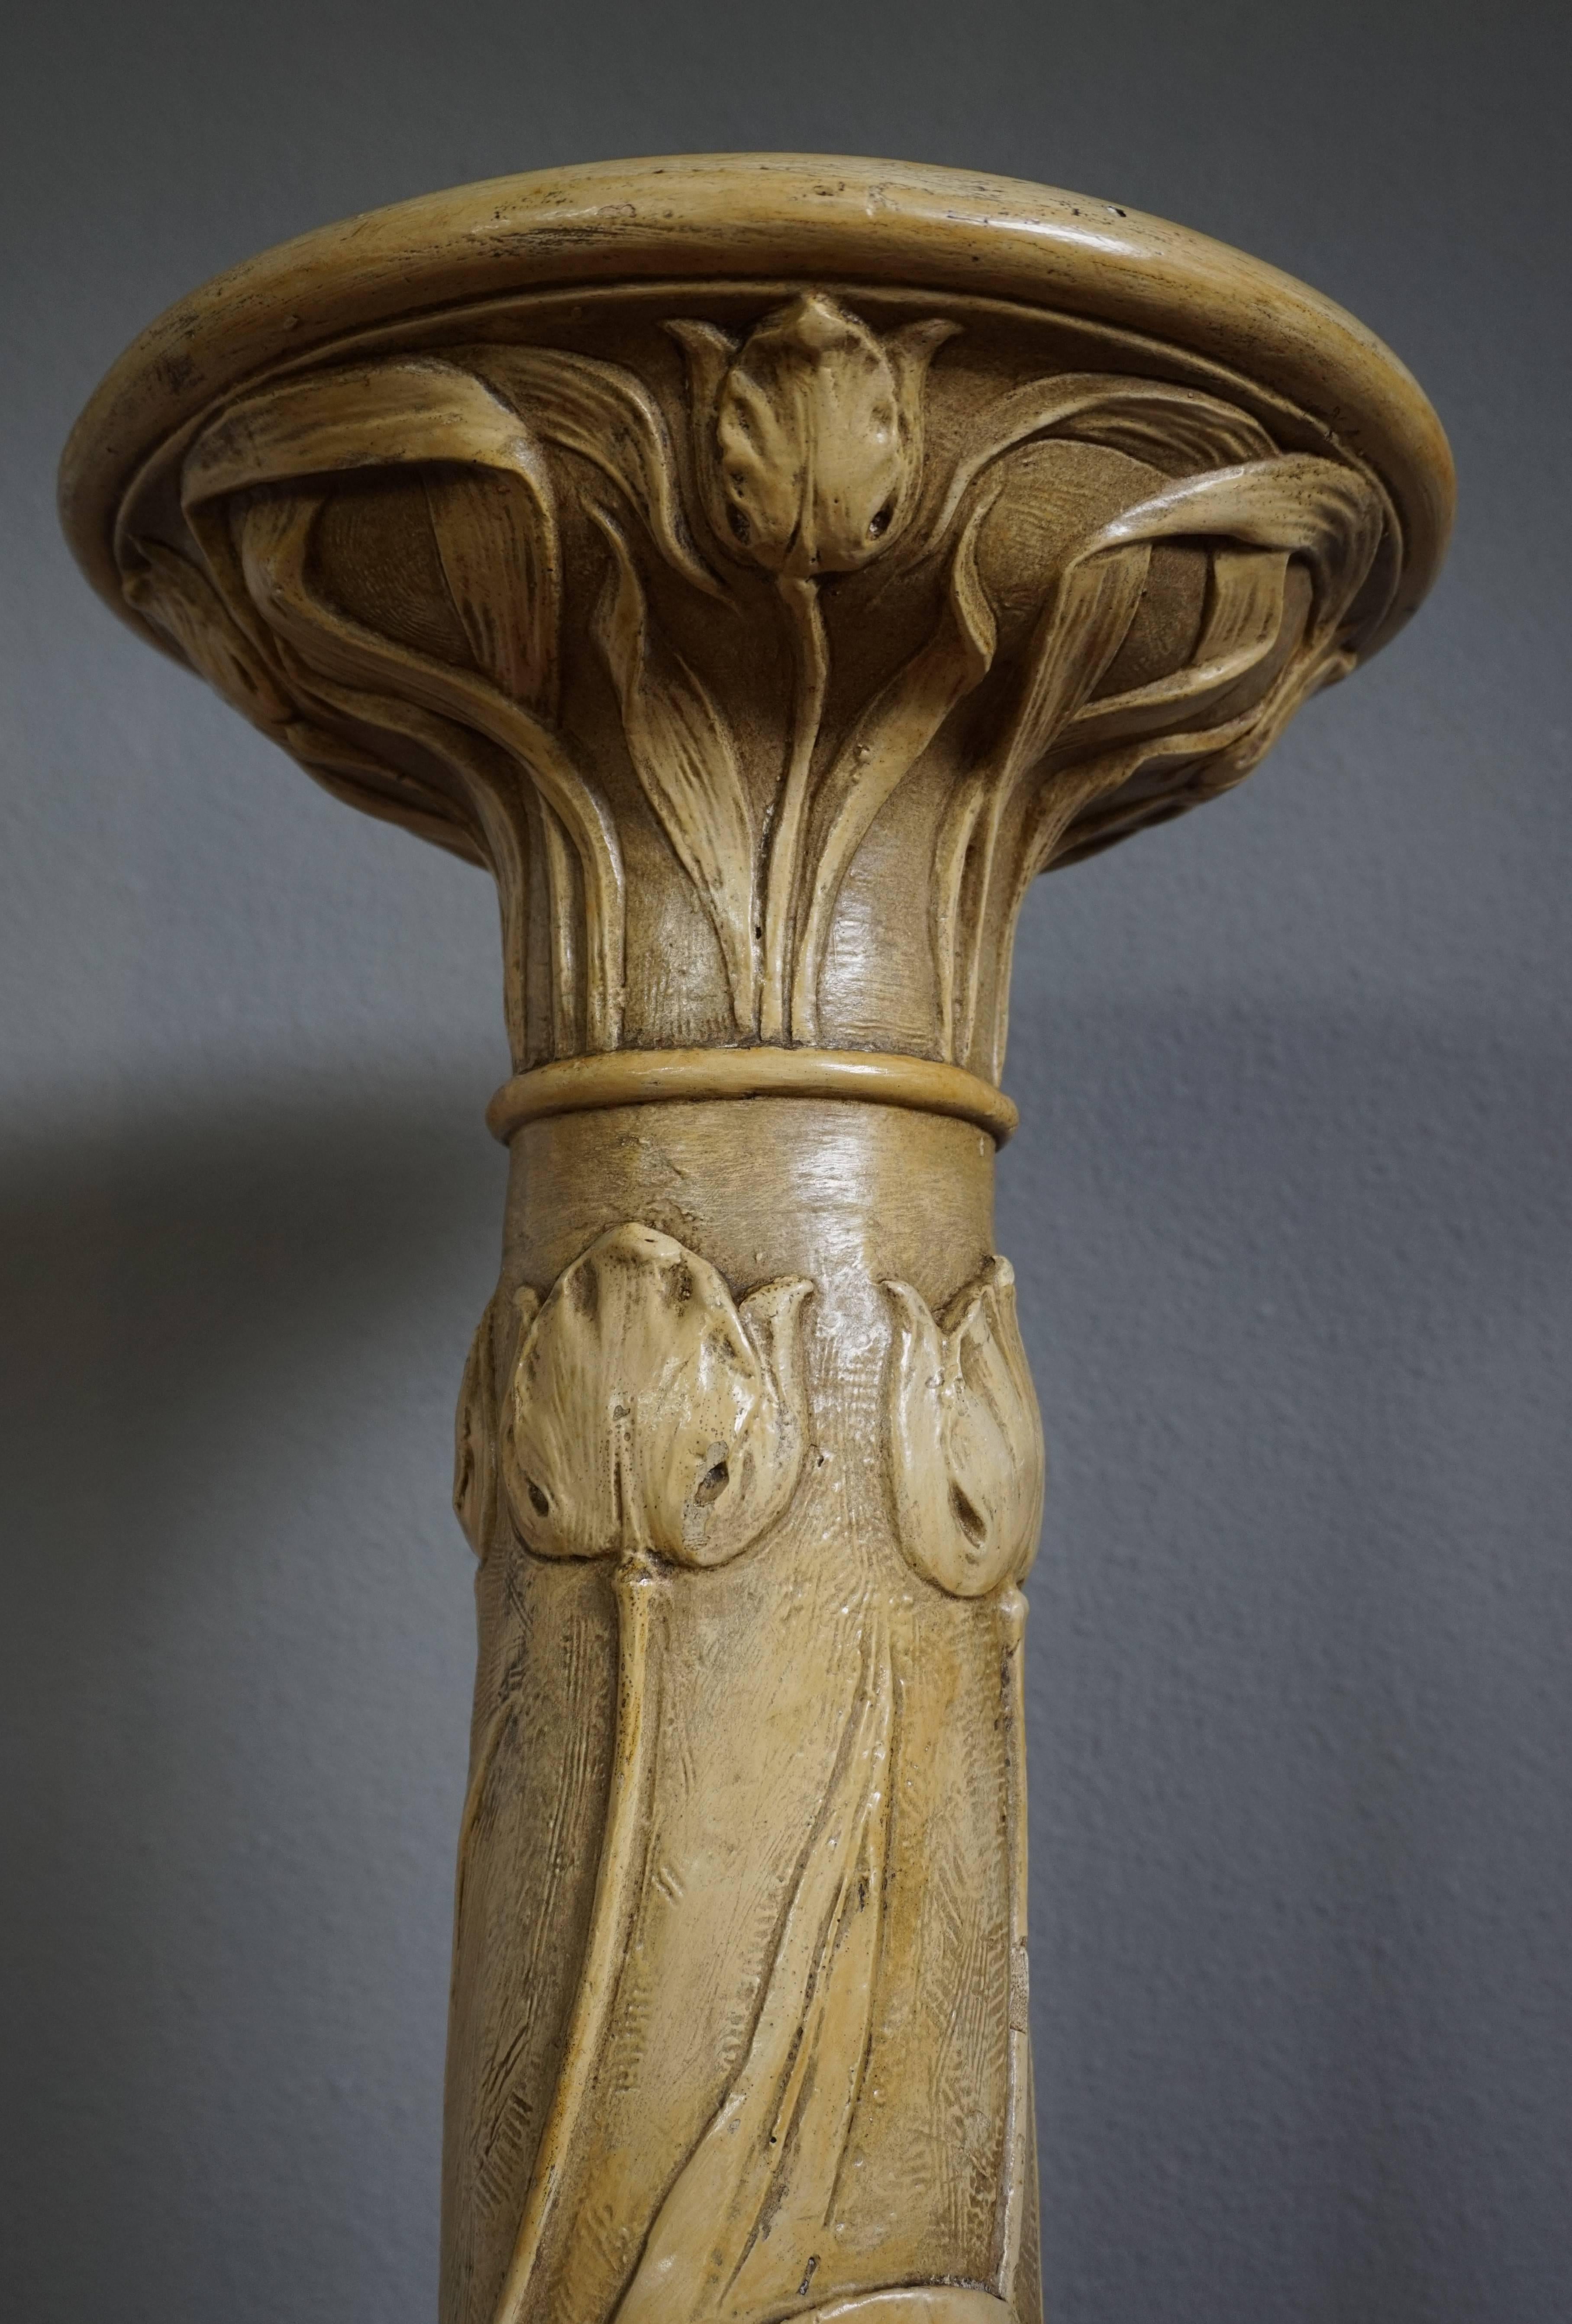 Antique Art Nouveau stand with maker's signature.

This rare Art Nouveau pedestal comes with various, elegant and organically flowing flower motifs in relief. These Art Nouveau home accessories are very rare, because of their relative fragility. To